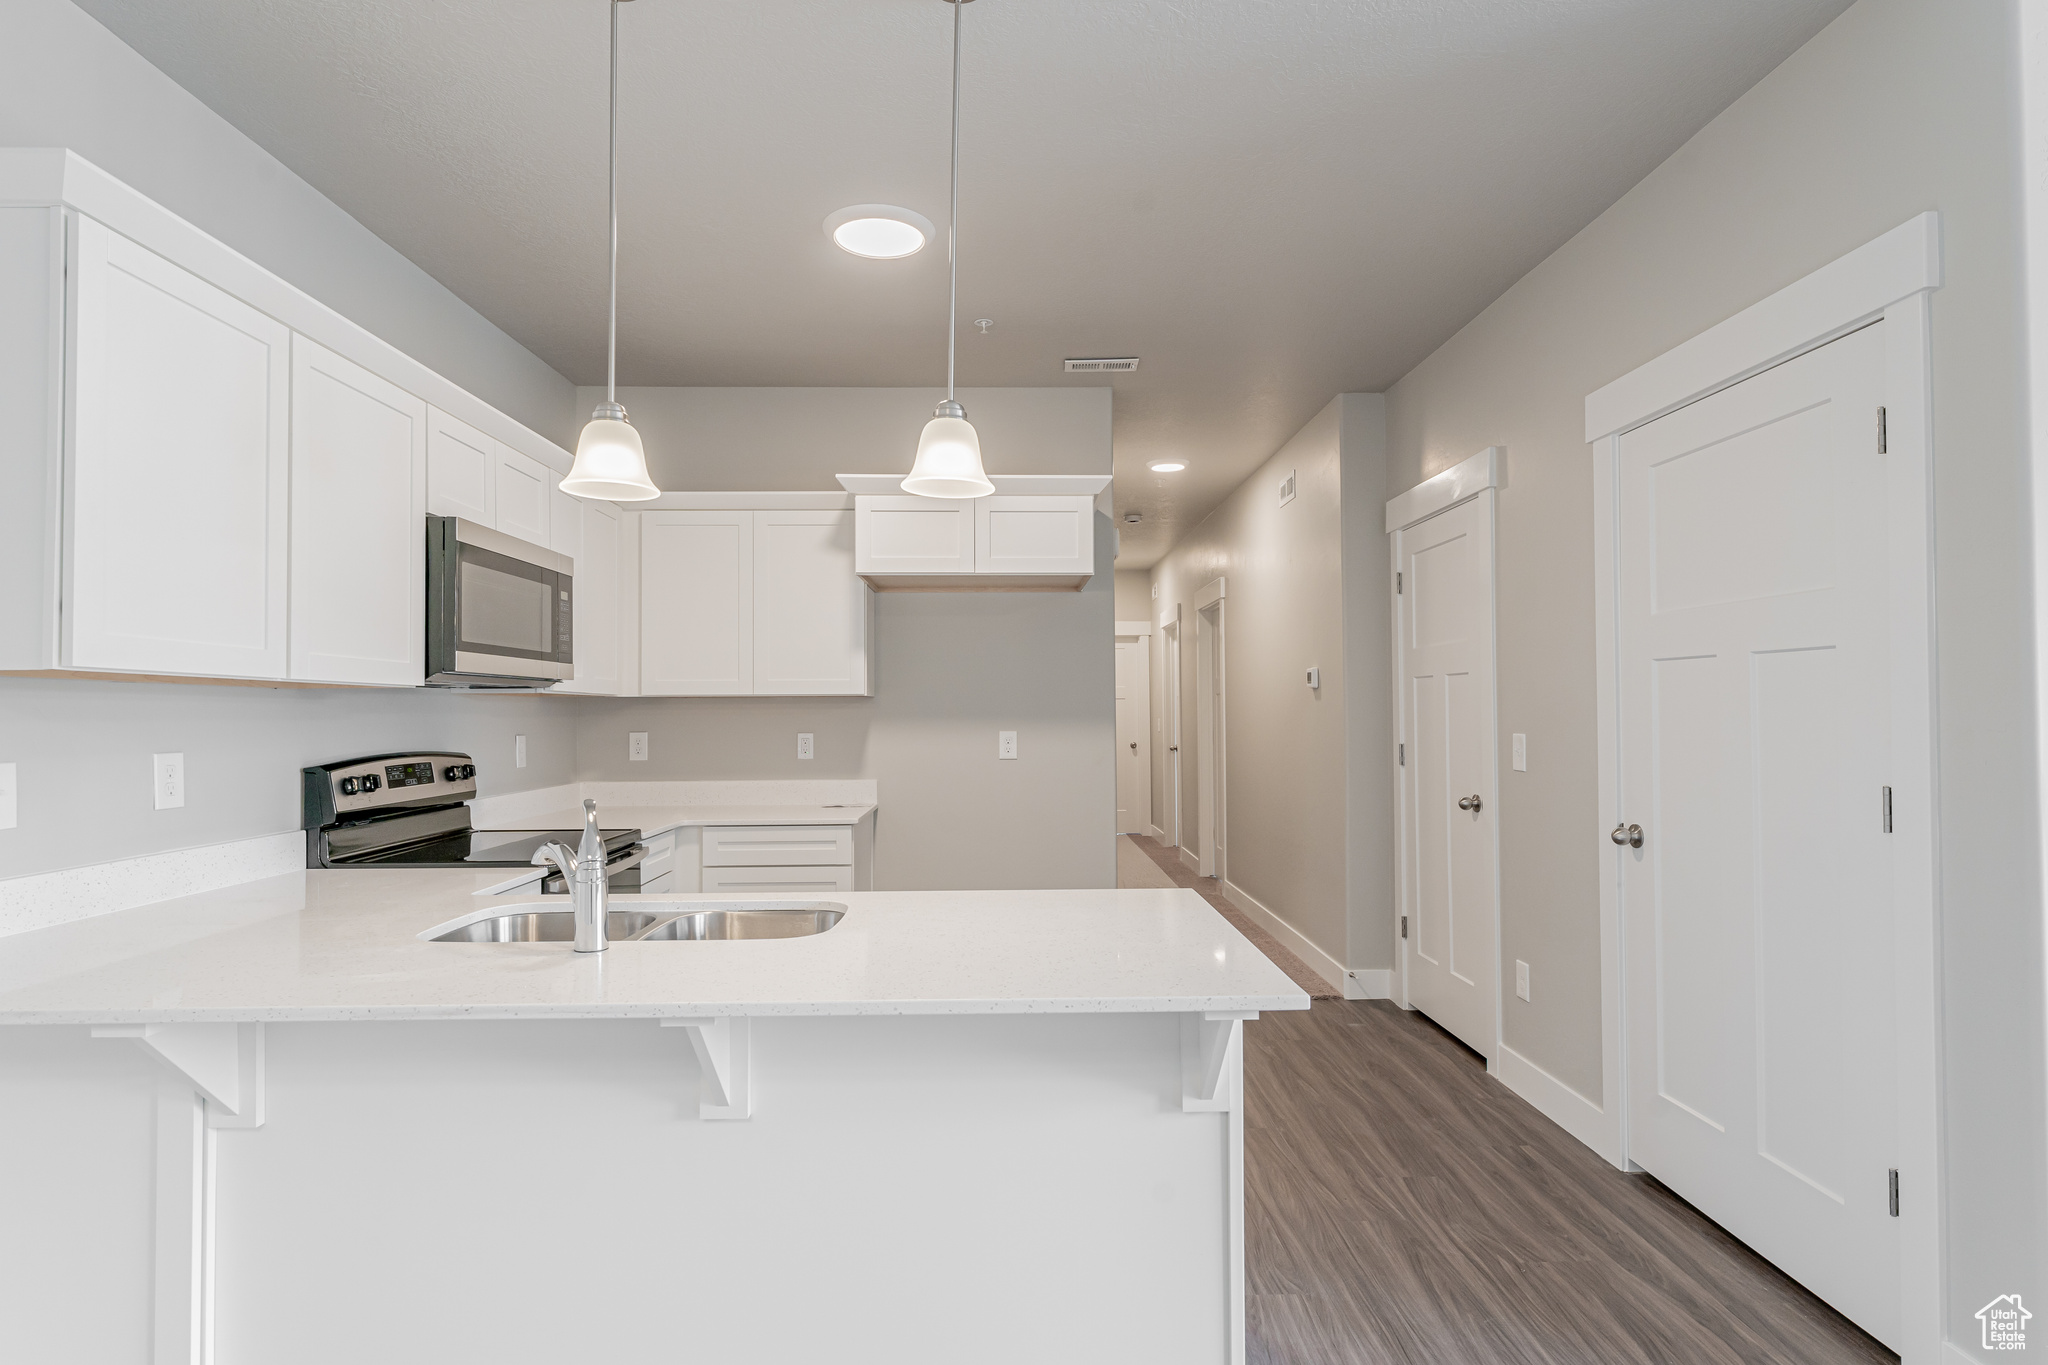 Kitchen featuring stainless steel appliances, decorative light fixtures, wood-type flooring, white cabinetry, and sink